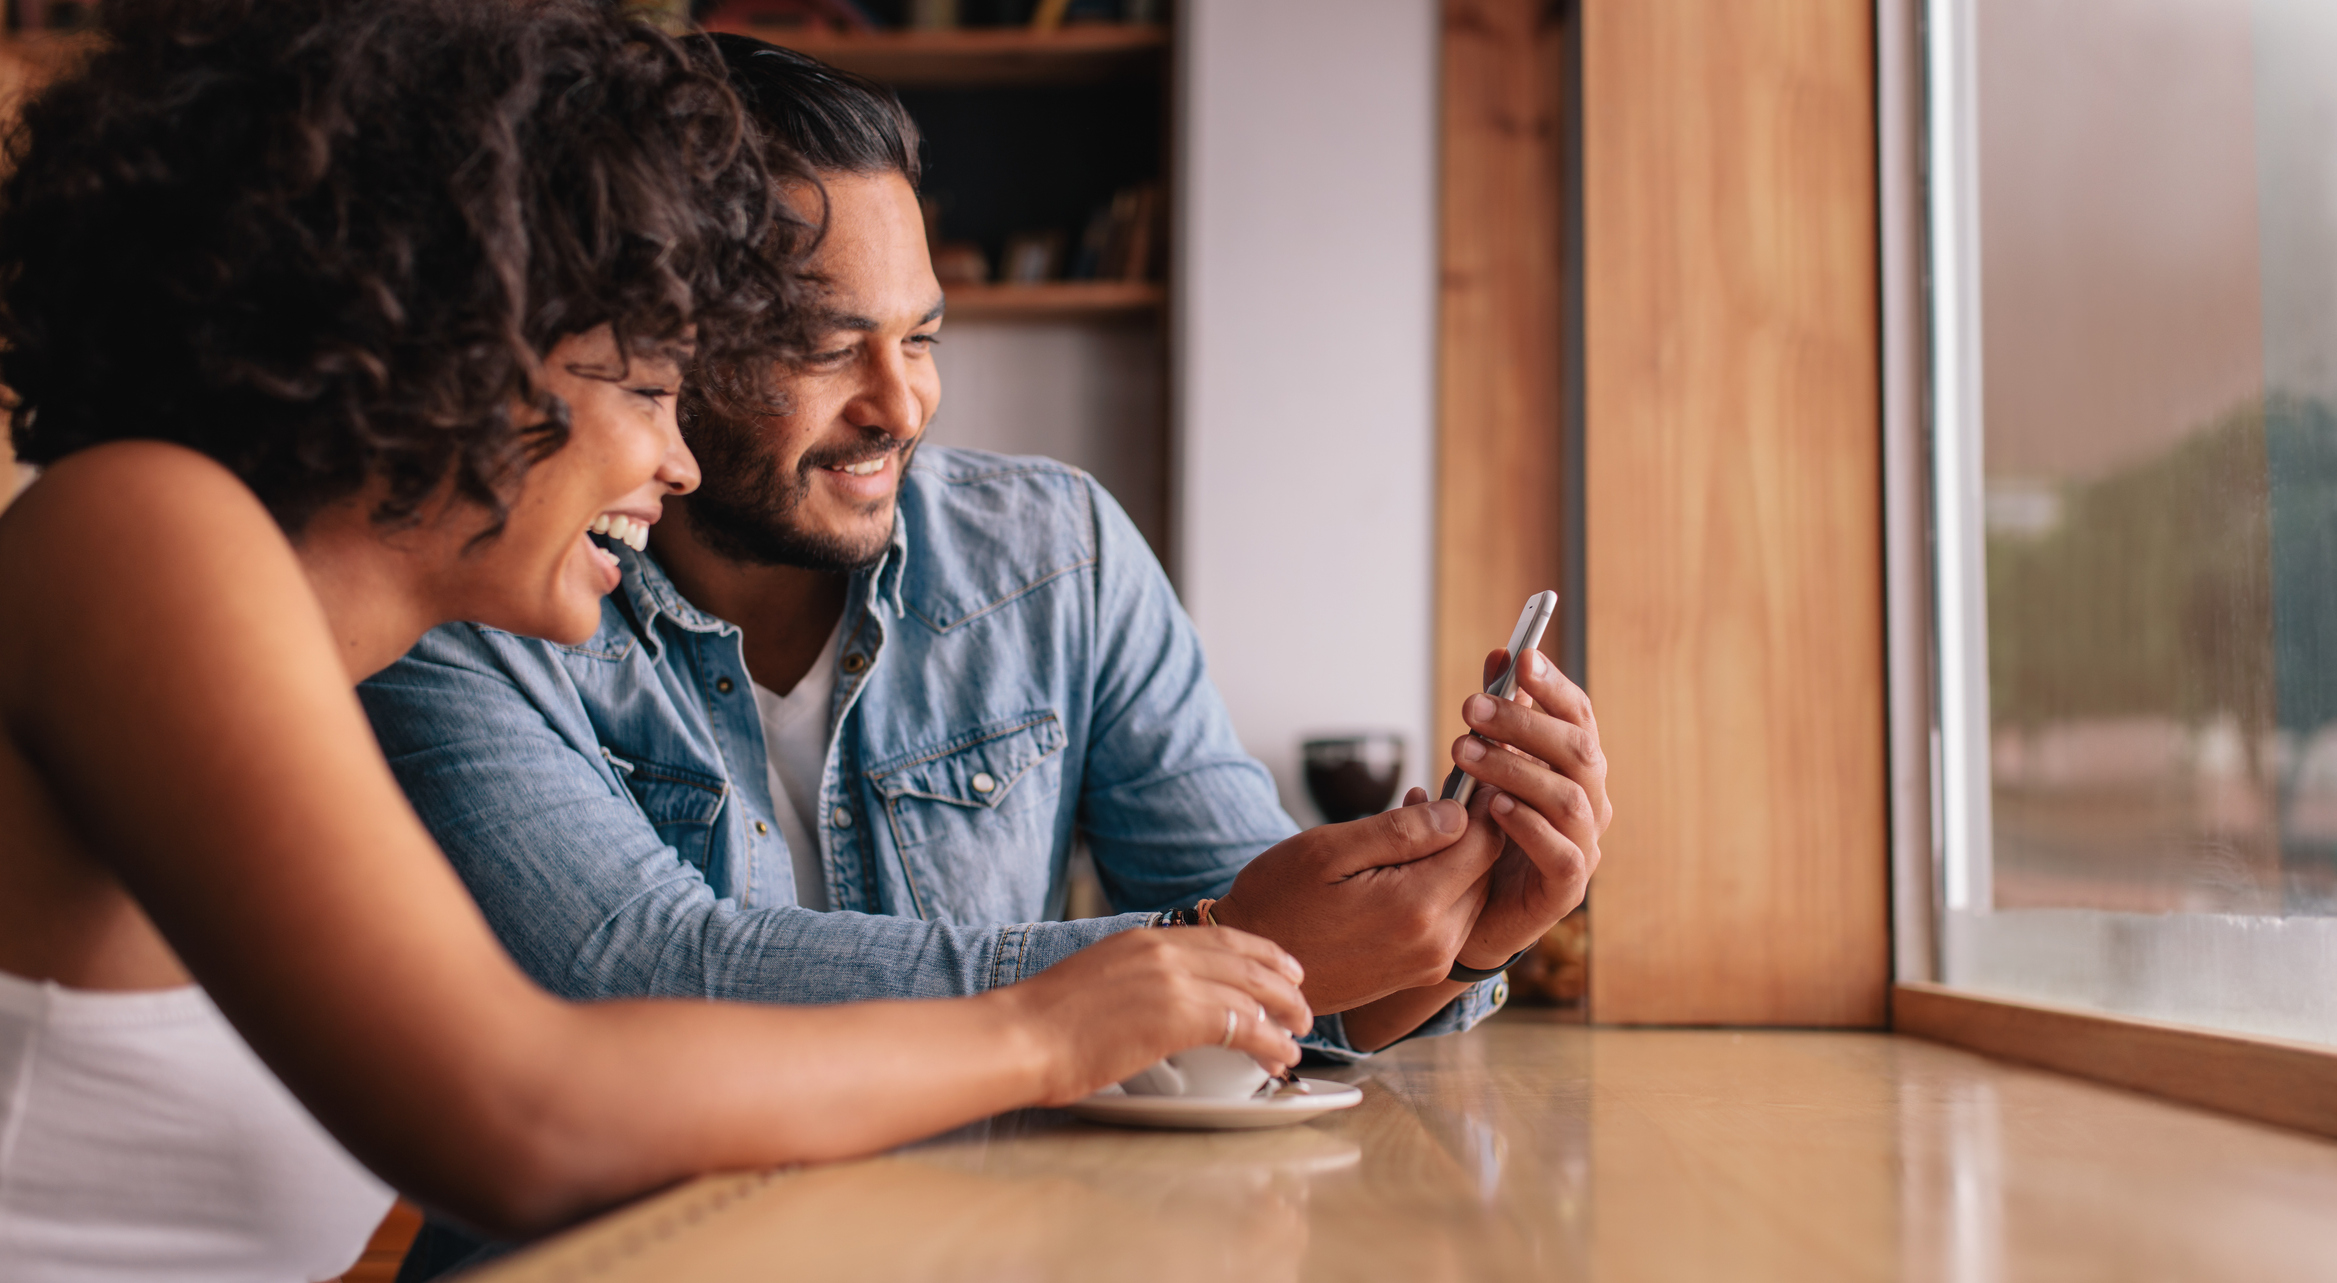 Stock Image of a Woman Holding A Cup Of Coffee and Man Holding A Cell Phone Sitting Together at A Table and Laughing At What Is on the Cell Phone